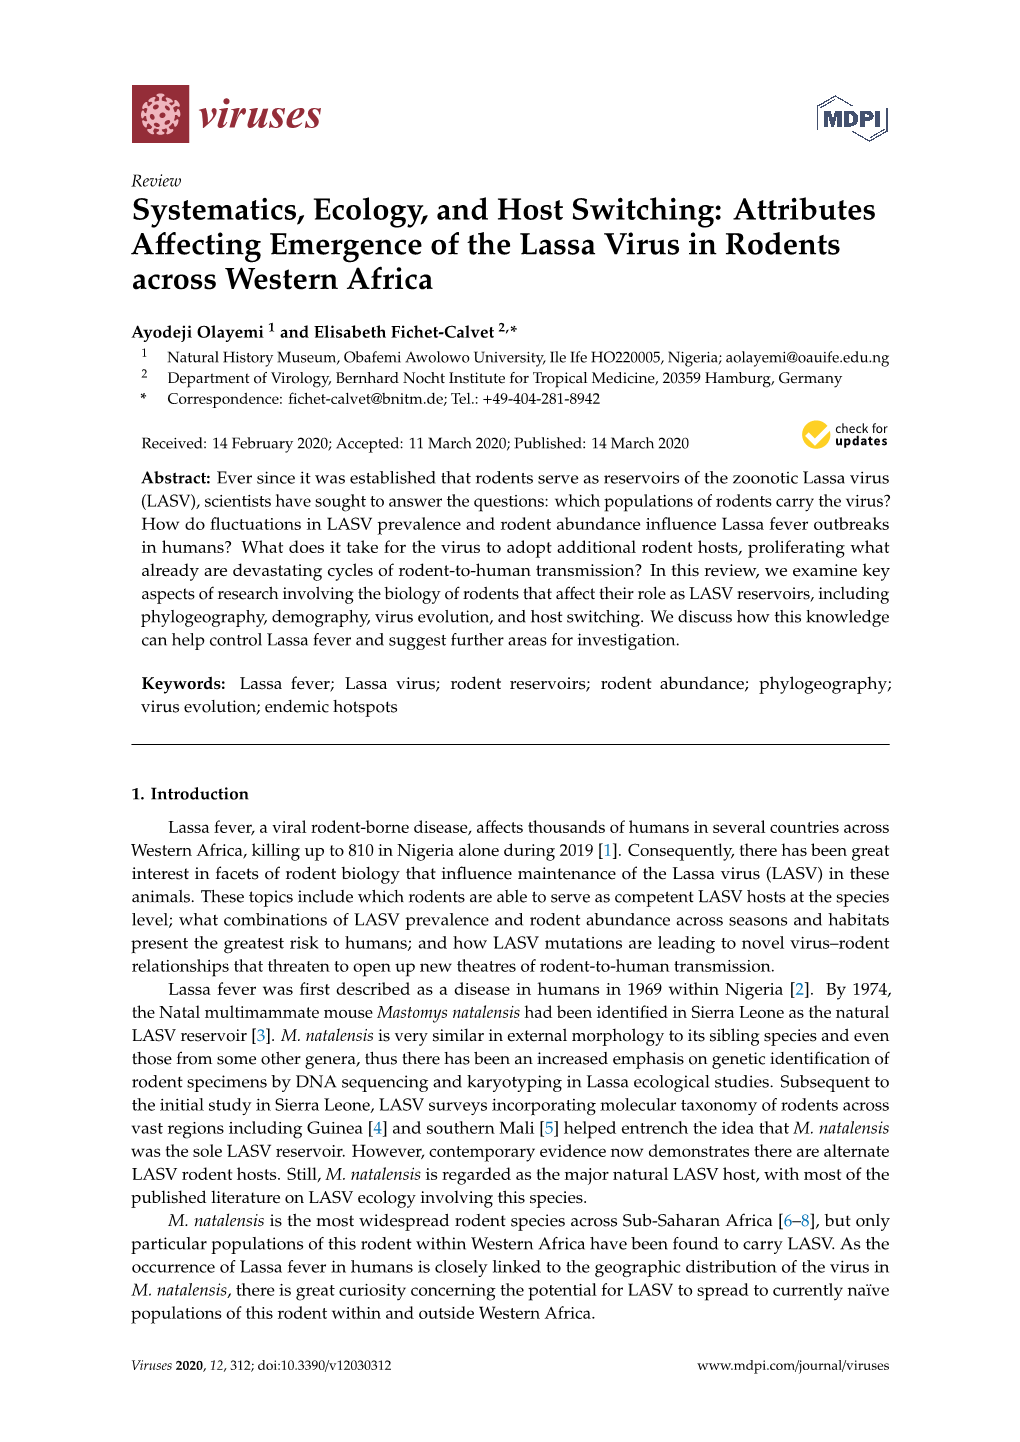 Attributes Affecting Emergence of the Lassa Virus in Rodents Across Western Africa